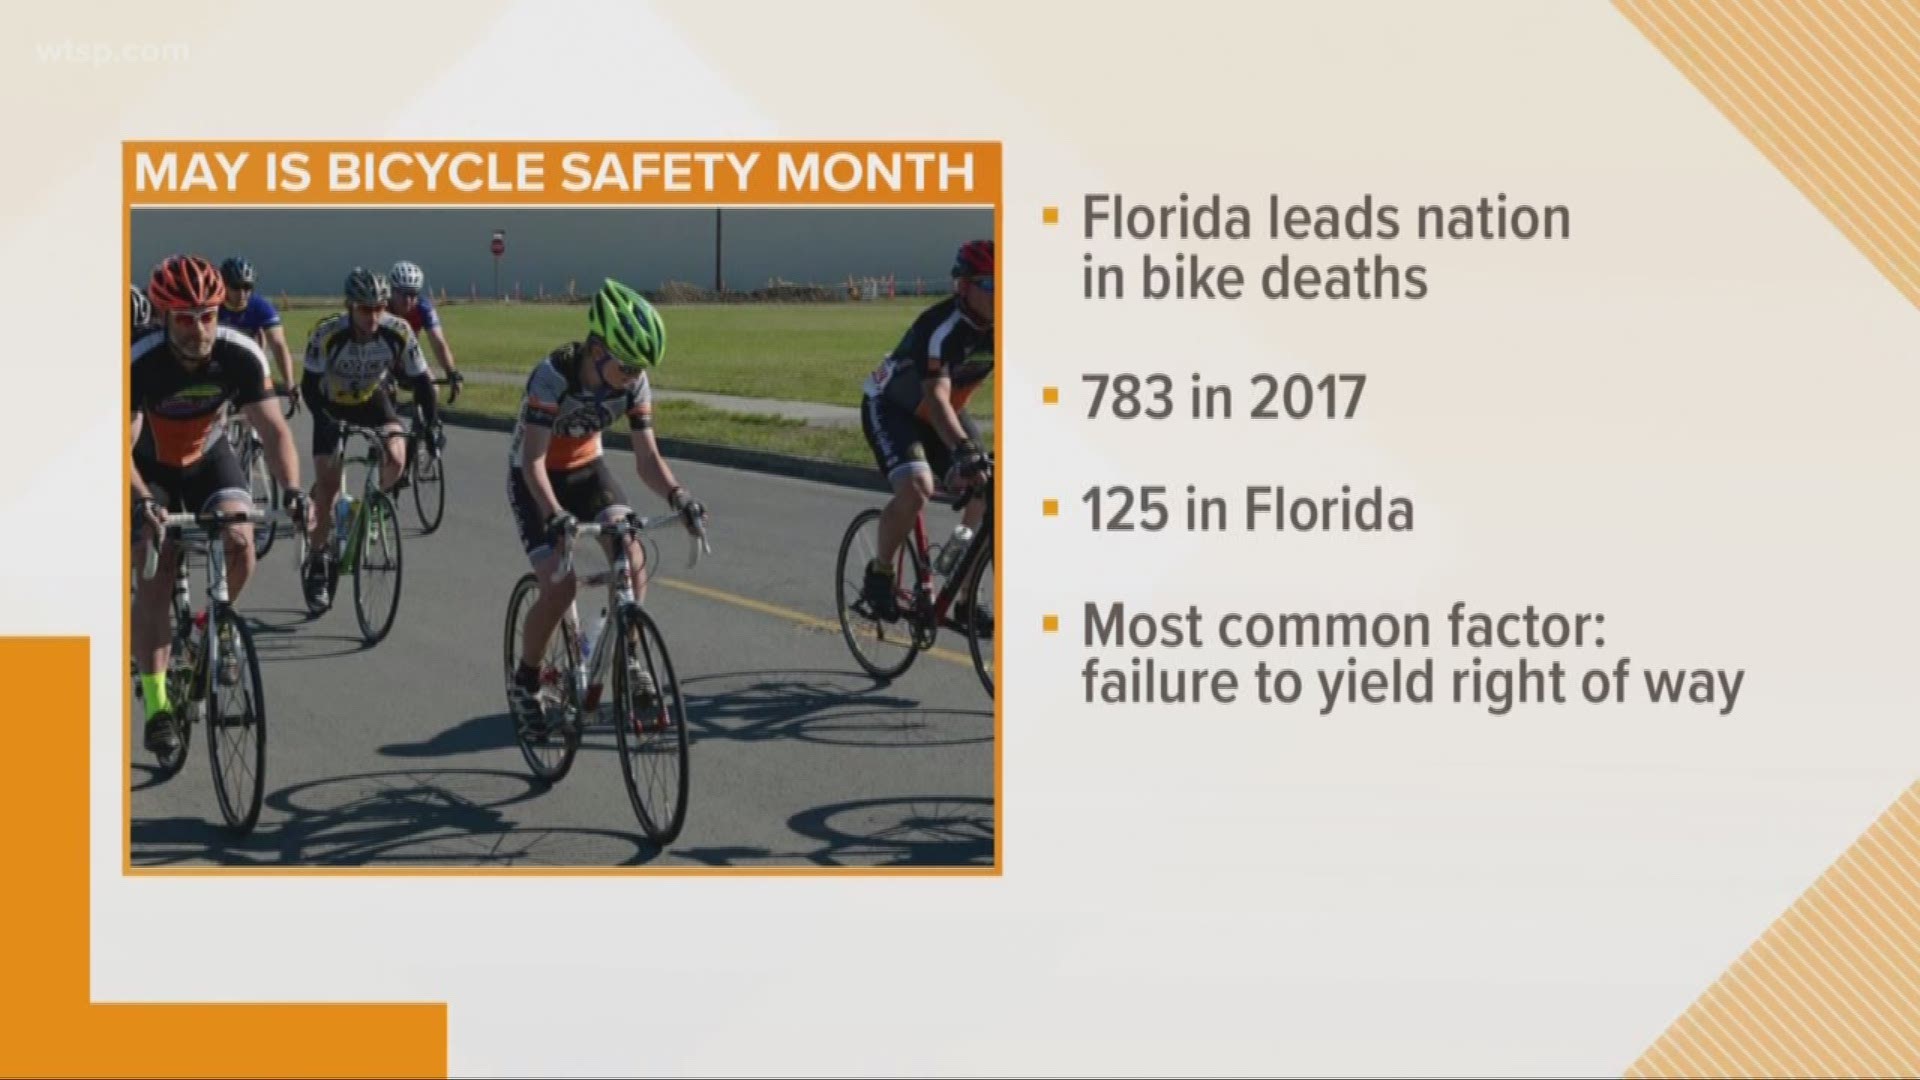 Some 125 cyclists were killed in Florida in 2017. https://on.wtsp.com/2JKjoQR